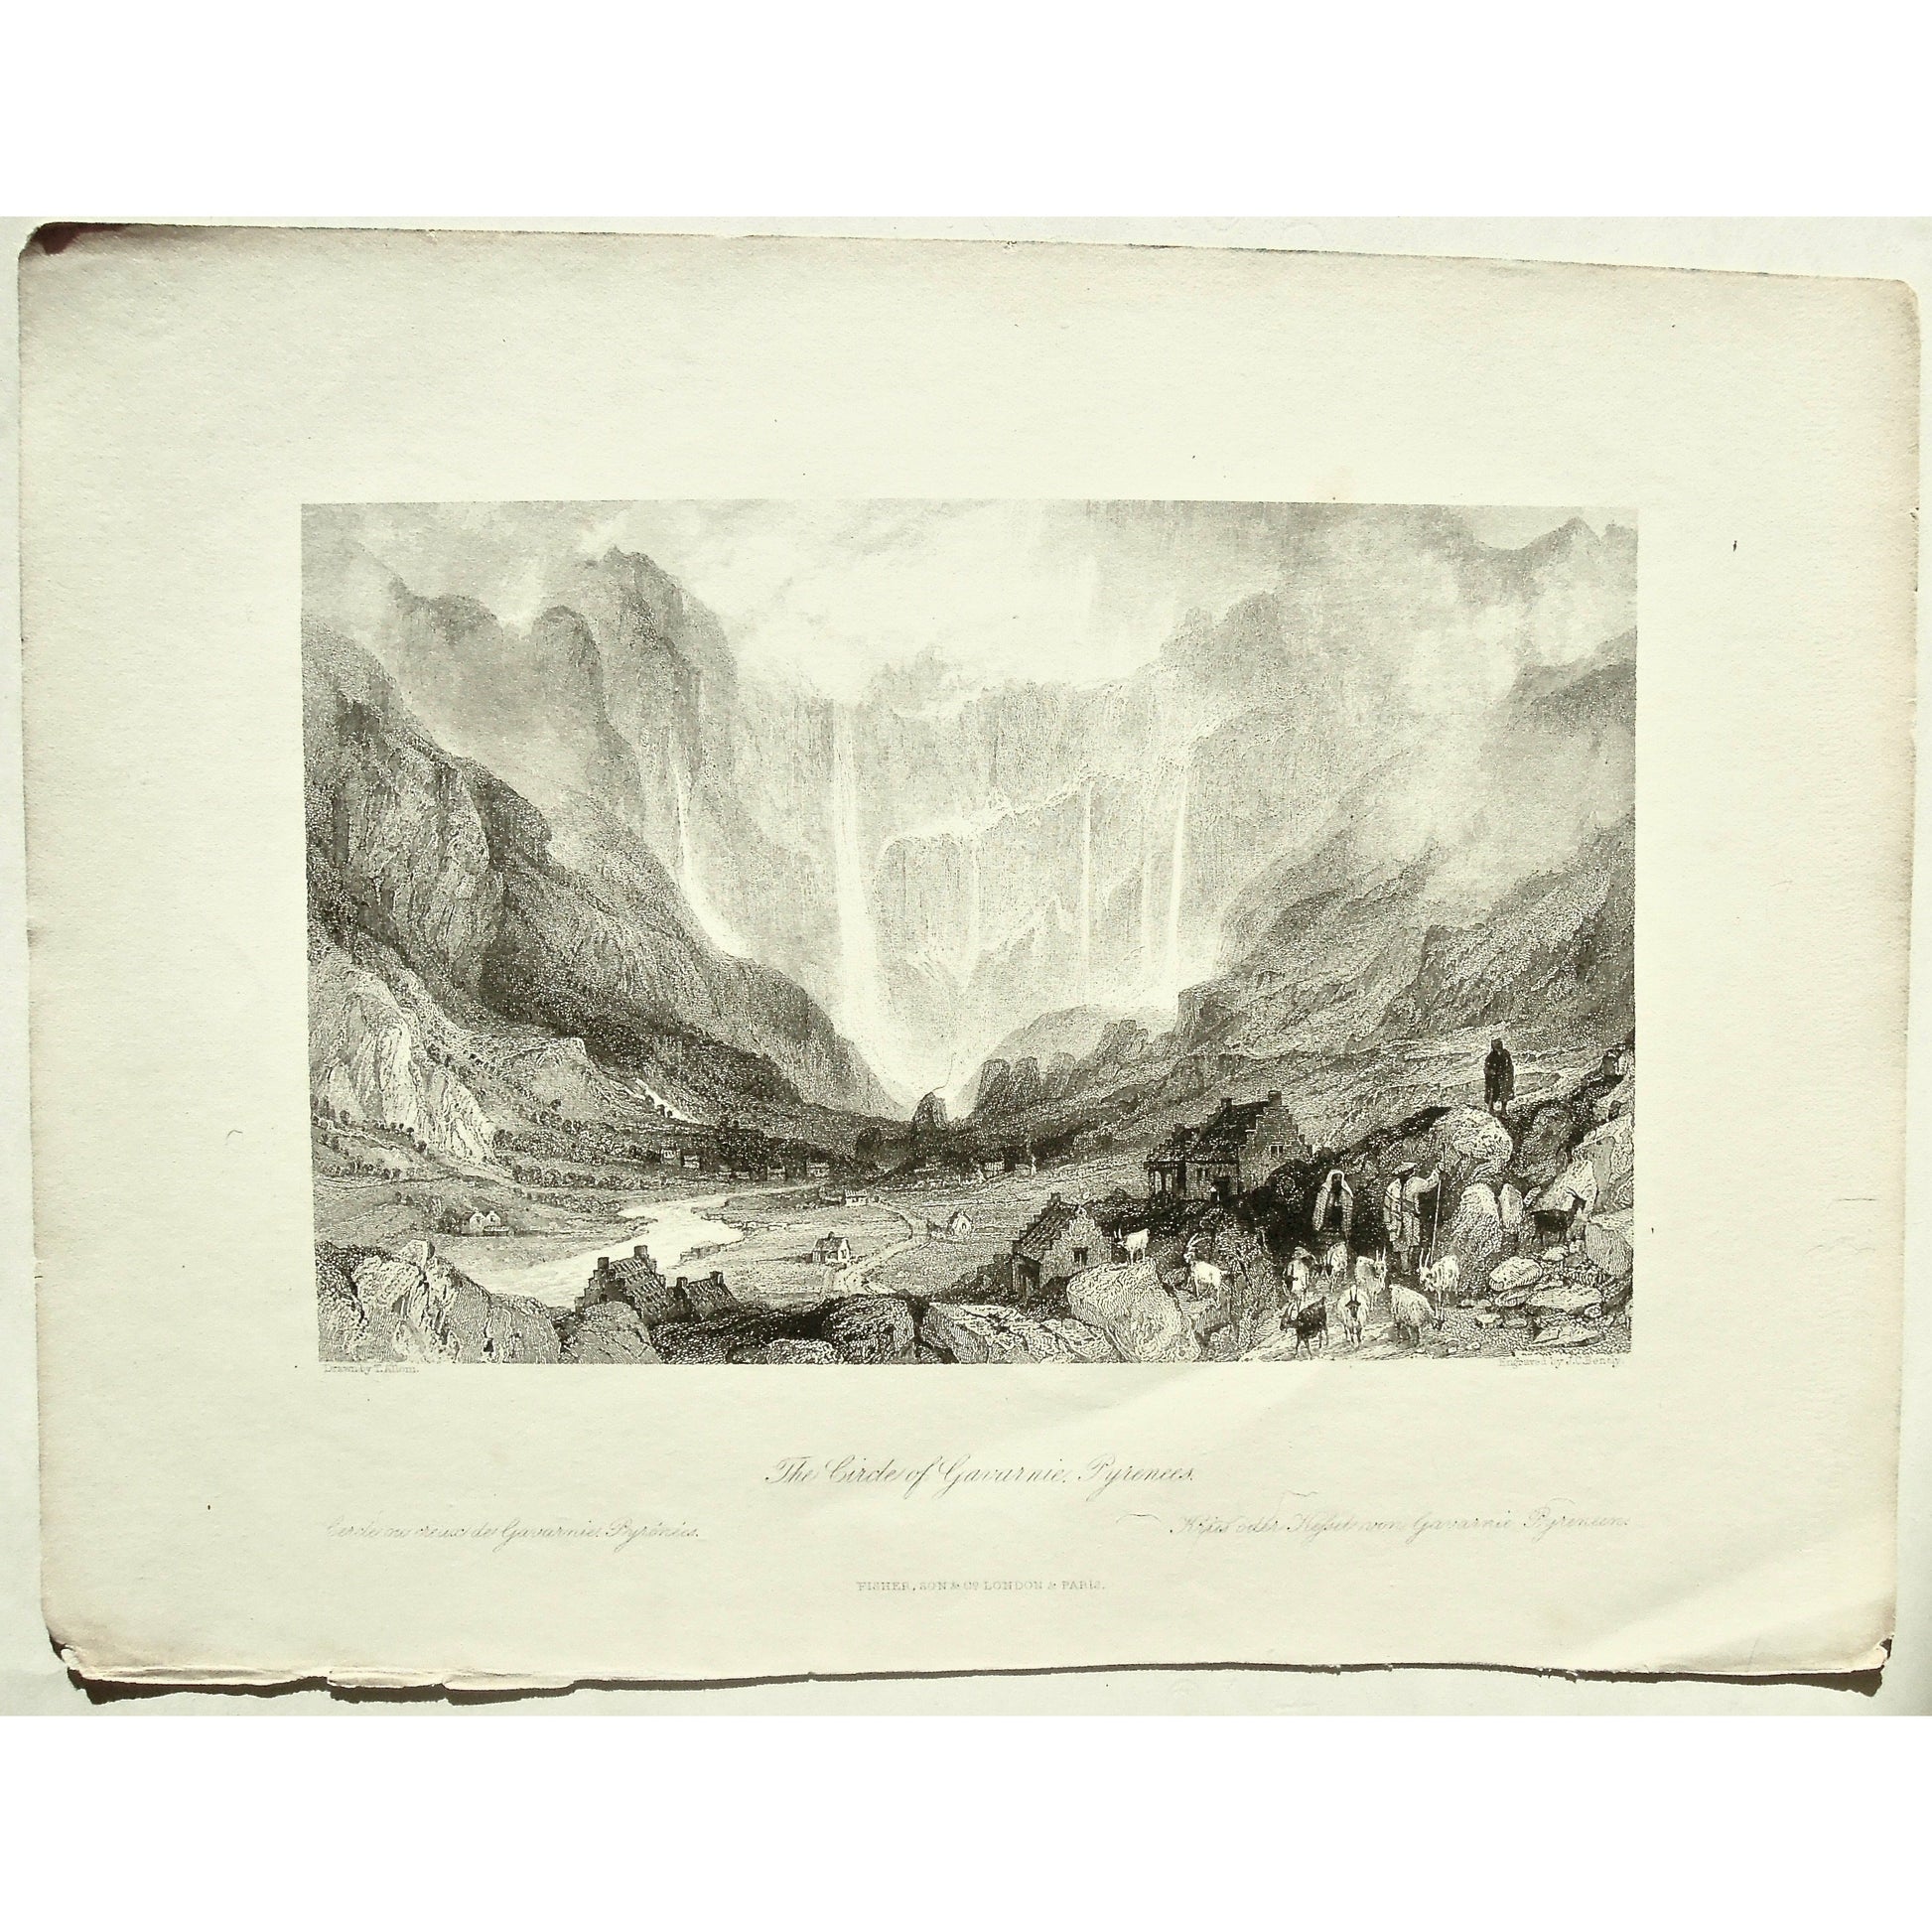 France, France Illustrated, Exhibiting its Landscape Scenery, Antiquities, Military and Ecclesiastical Architecture, Thomas Allom, Allom, Fisher, Son & Co., London, Paris, Reverend George Newenham, Newenham, Caxton Press, Angel St., Martin's-Le-Grand, Mandeville, Neuve Vivienne, 1845, Circle of Gavarnie, Gavarnie, Pyrenees, Pyrenees mountains, farms, farming, Goats, shepherds, herding, waterfalls, mountains, village, villages,